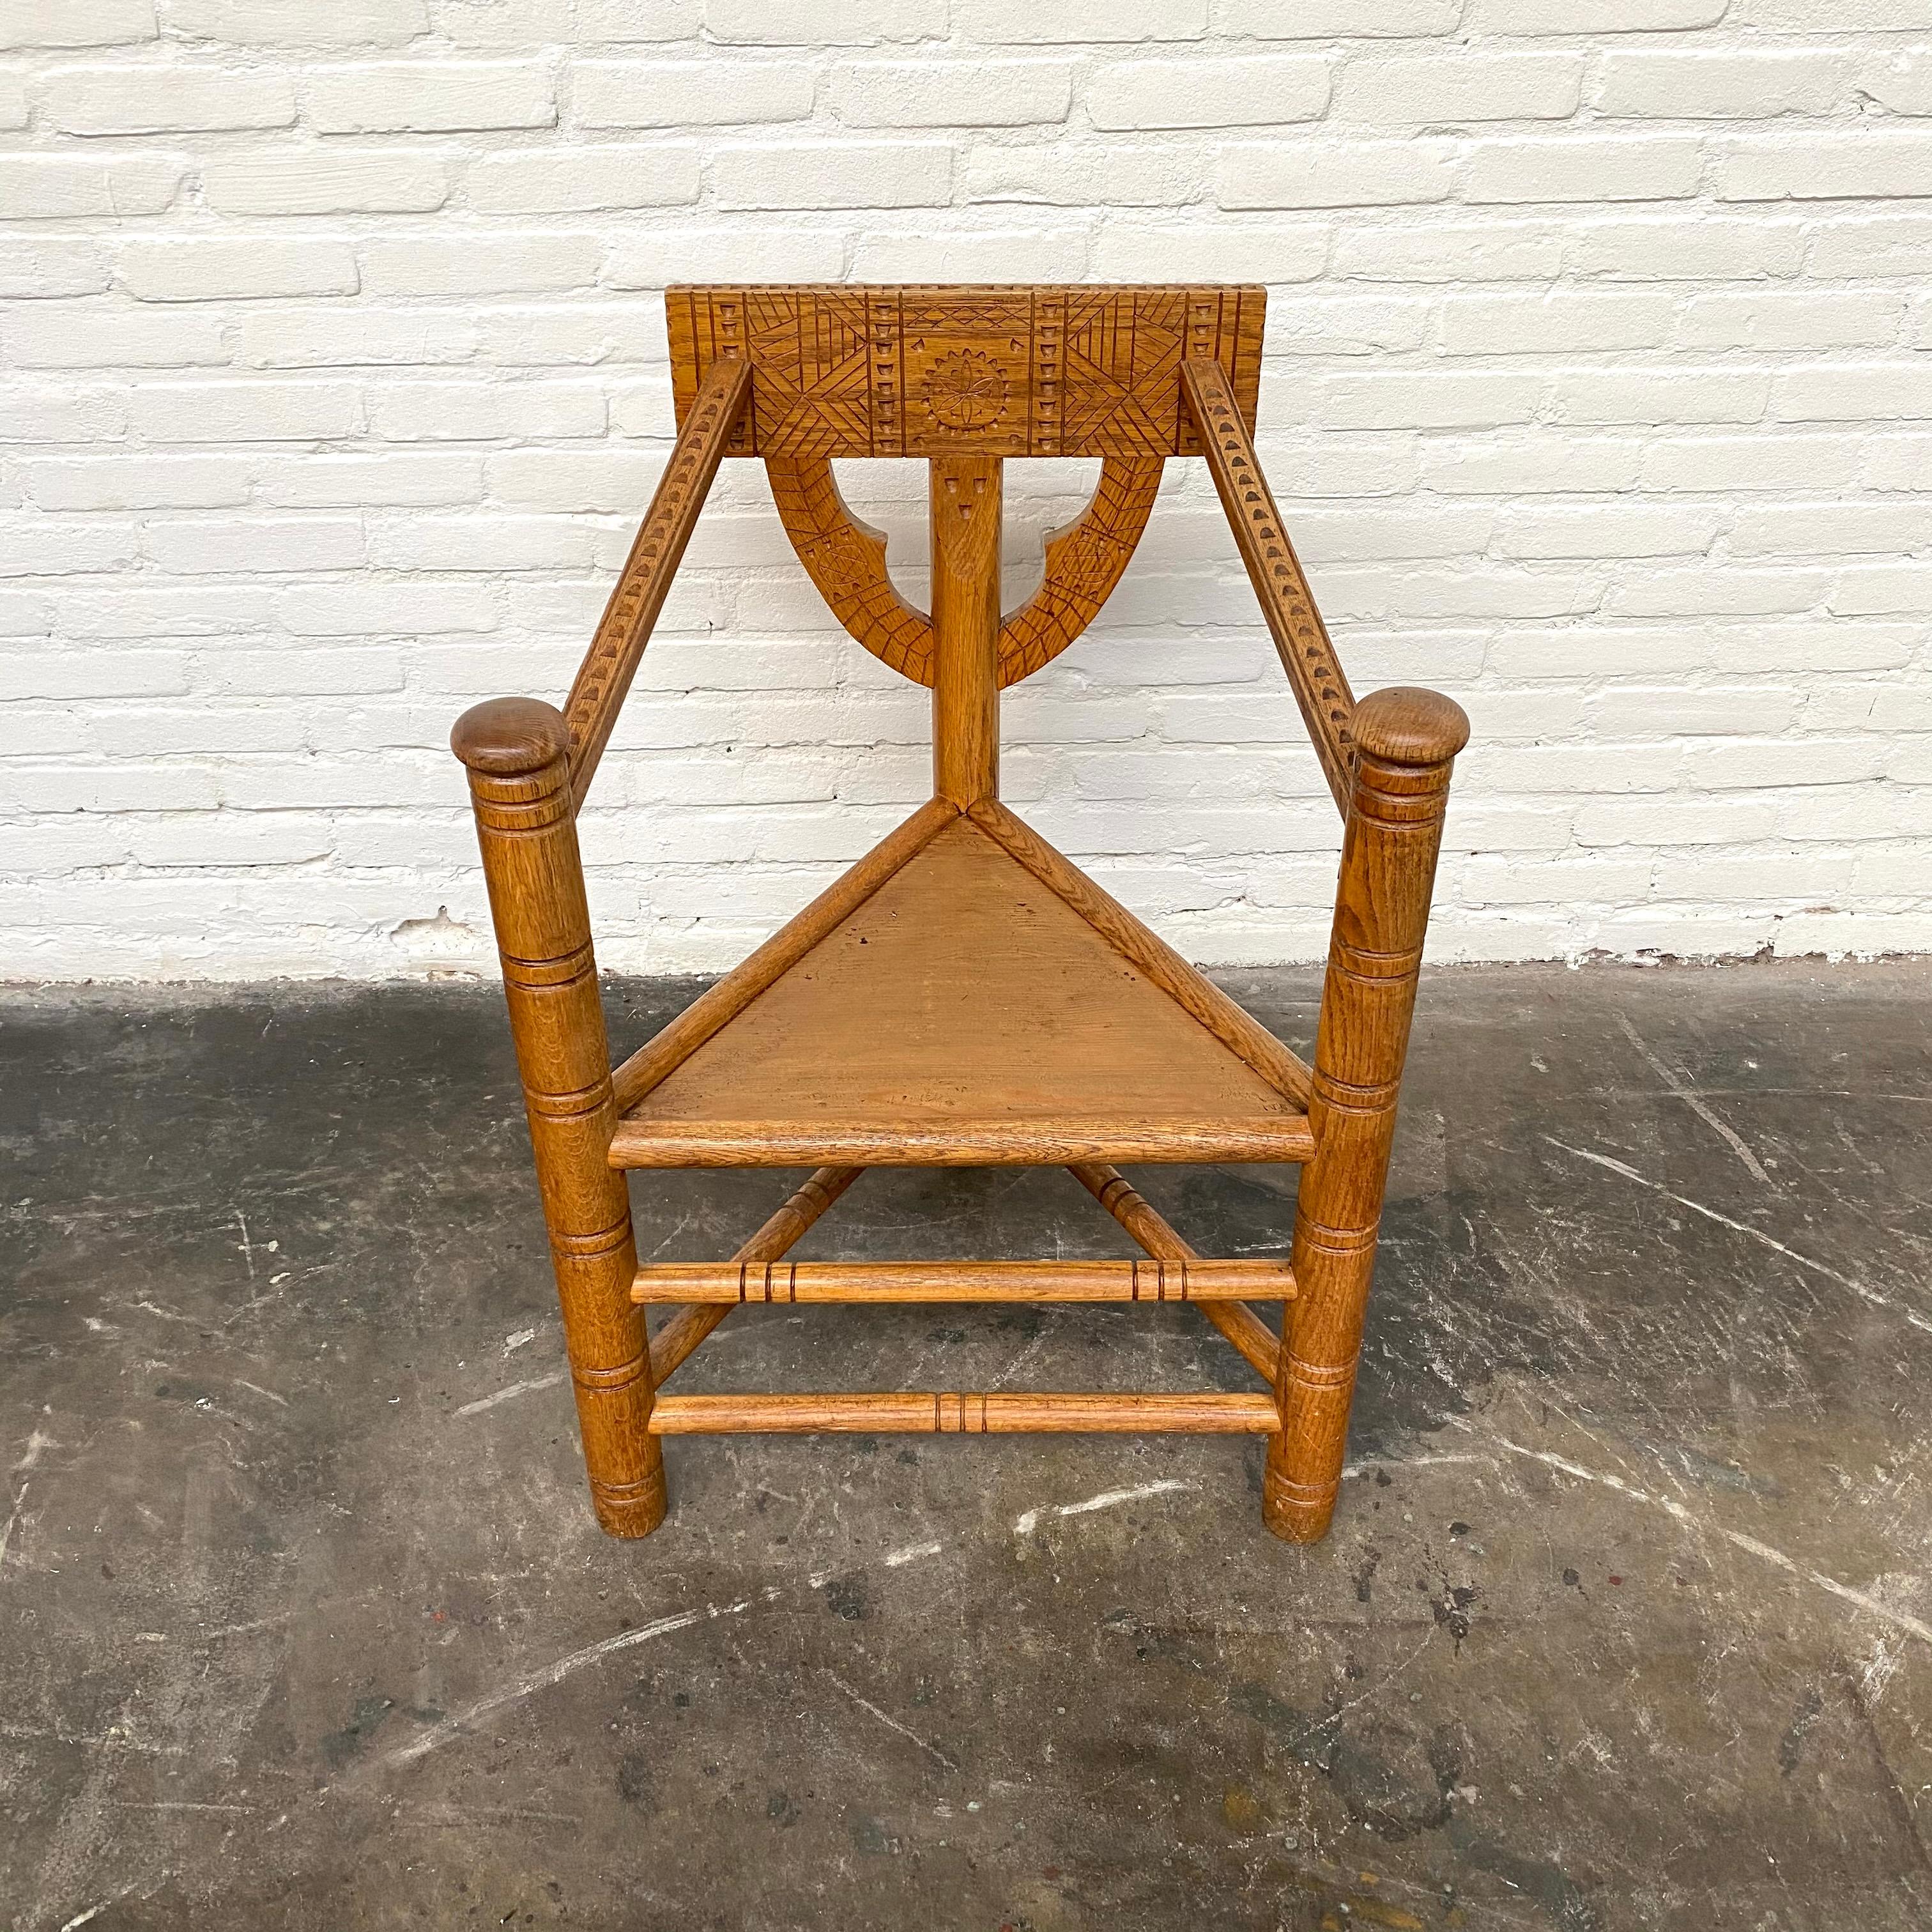 This Swedish monk chair is made of solid oak, handmade in the early 20th century. The chair is ornated with delicate carvings.